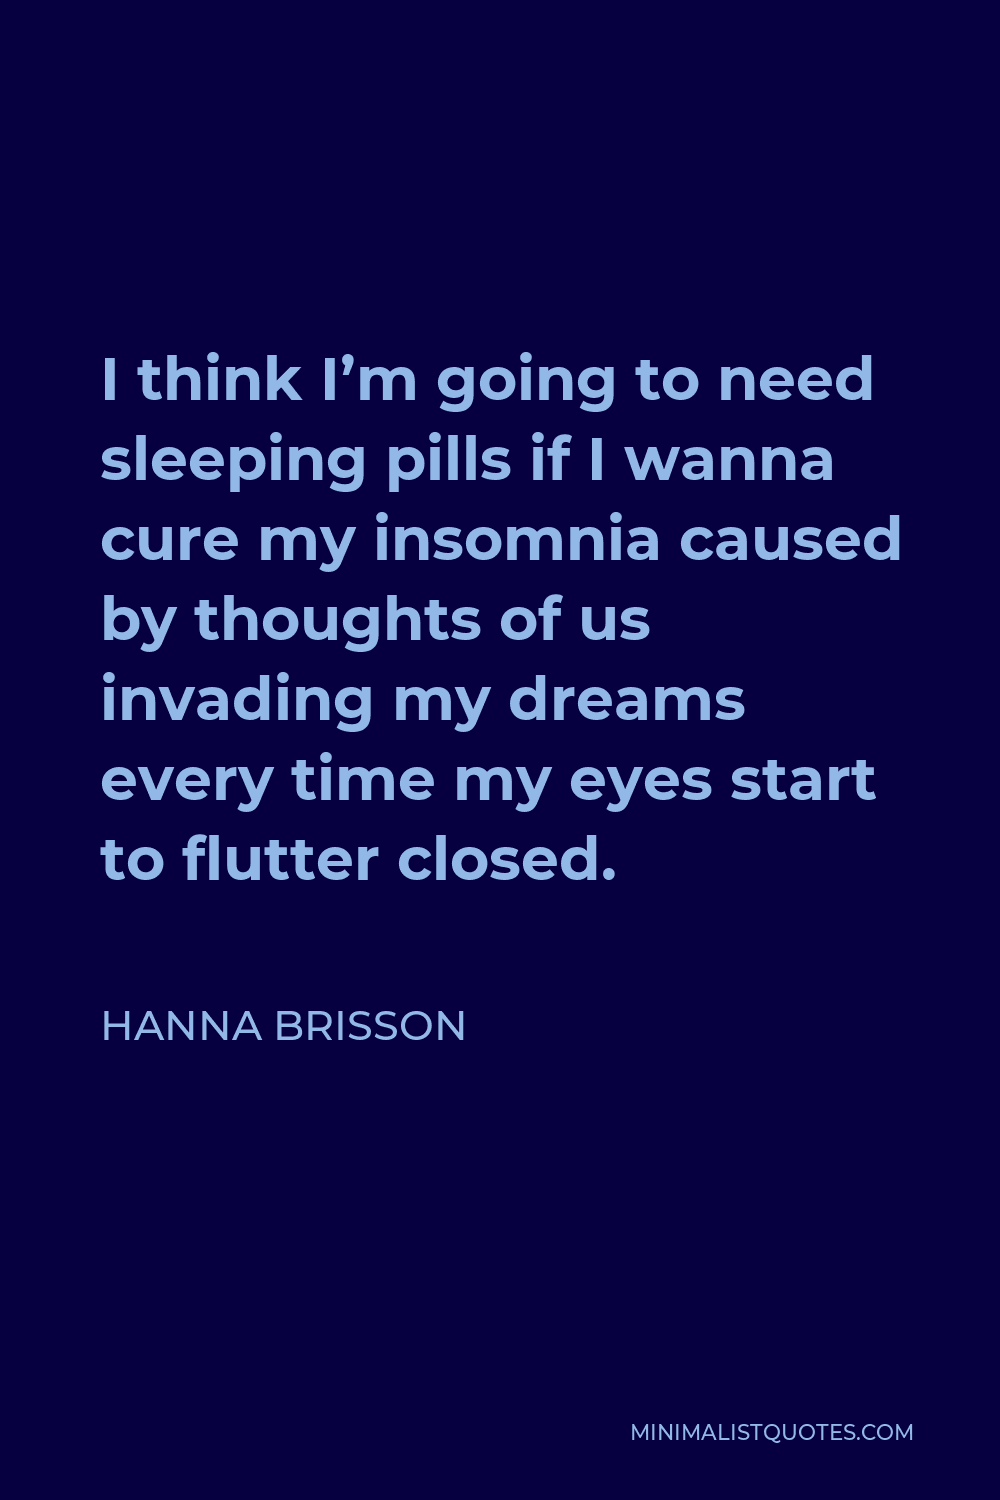 Hanna Brisson Quote - I think I’m going to need sleeping pills if I wanna cure my insomnia caused by thoughts of us invading my dreams every time my eyes start to flutter closed.